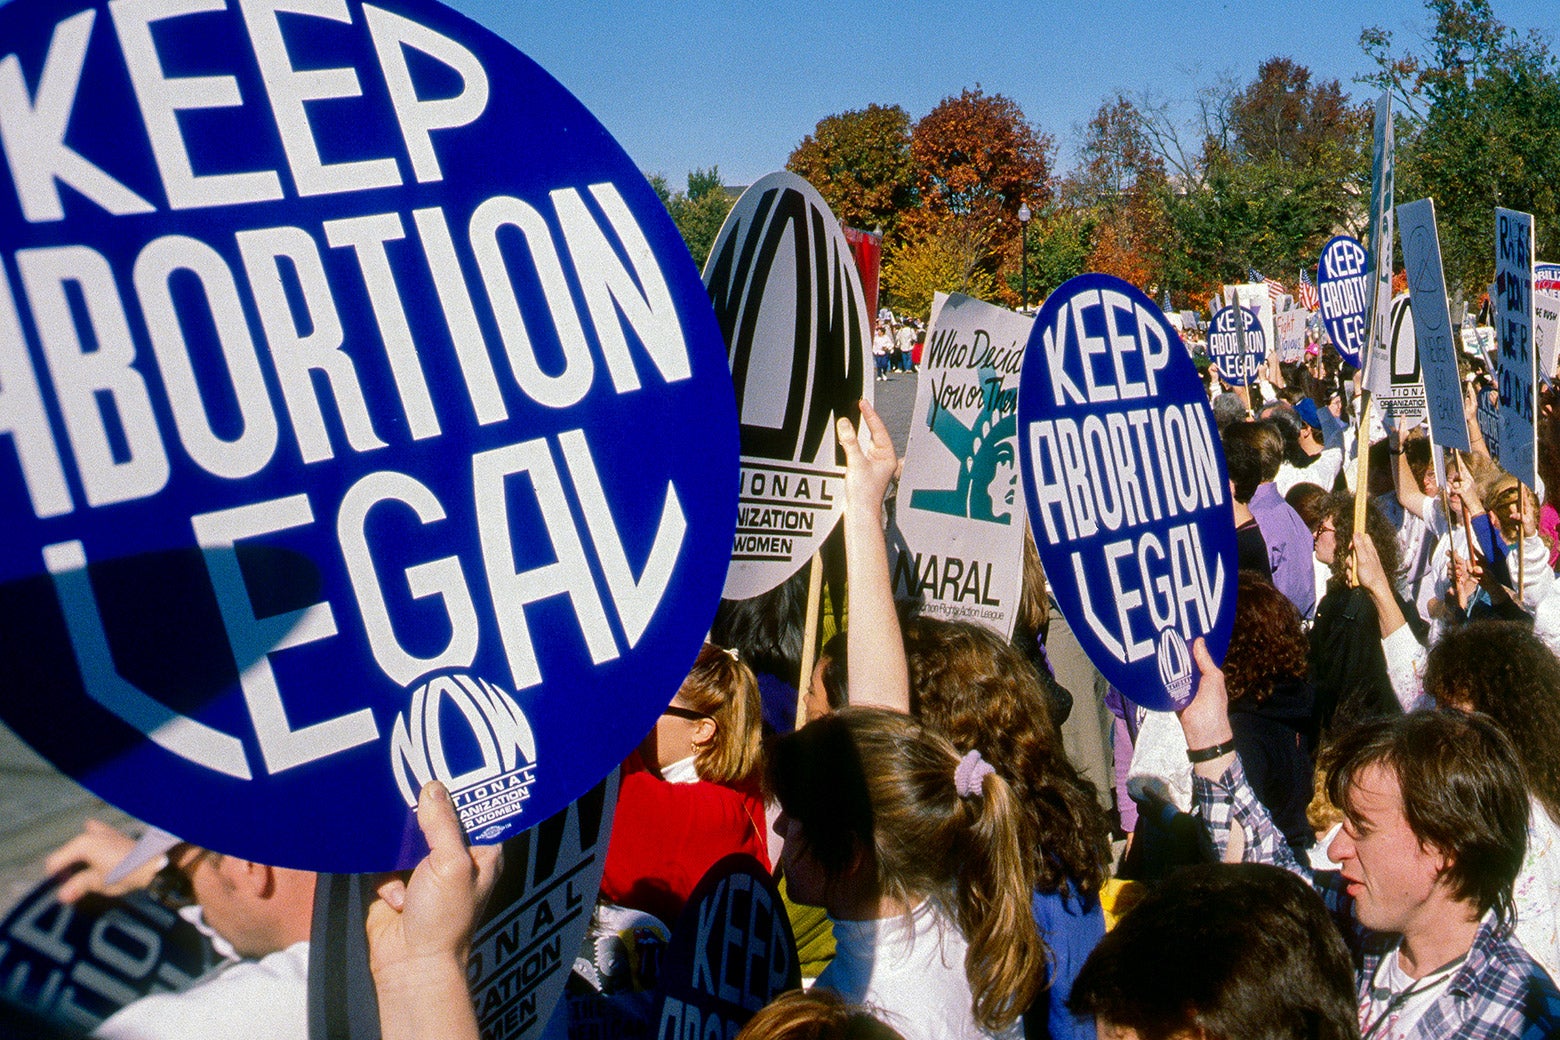 Protesters hold "Keep abortion legal" signs.